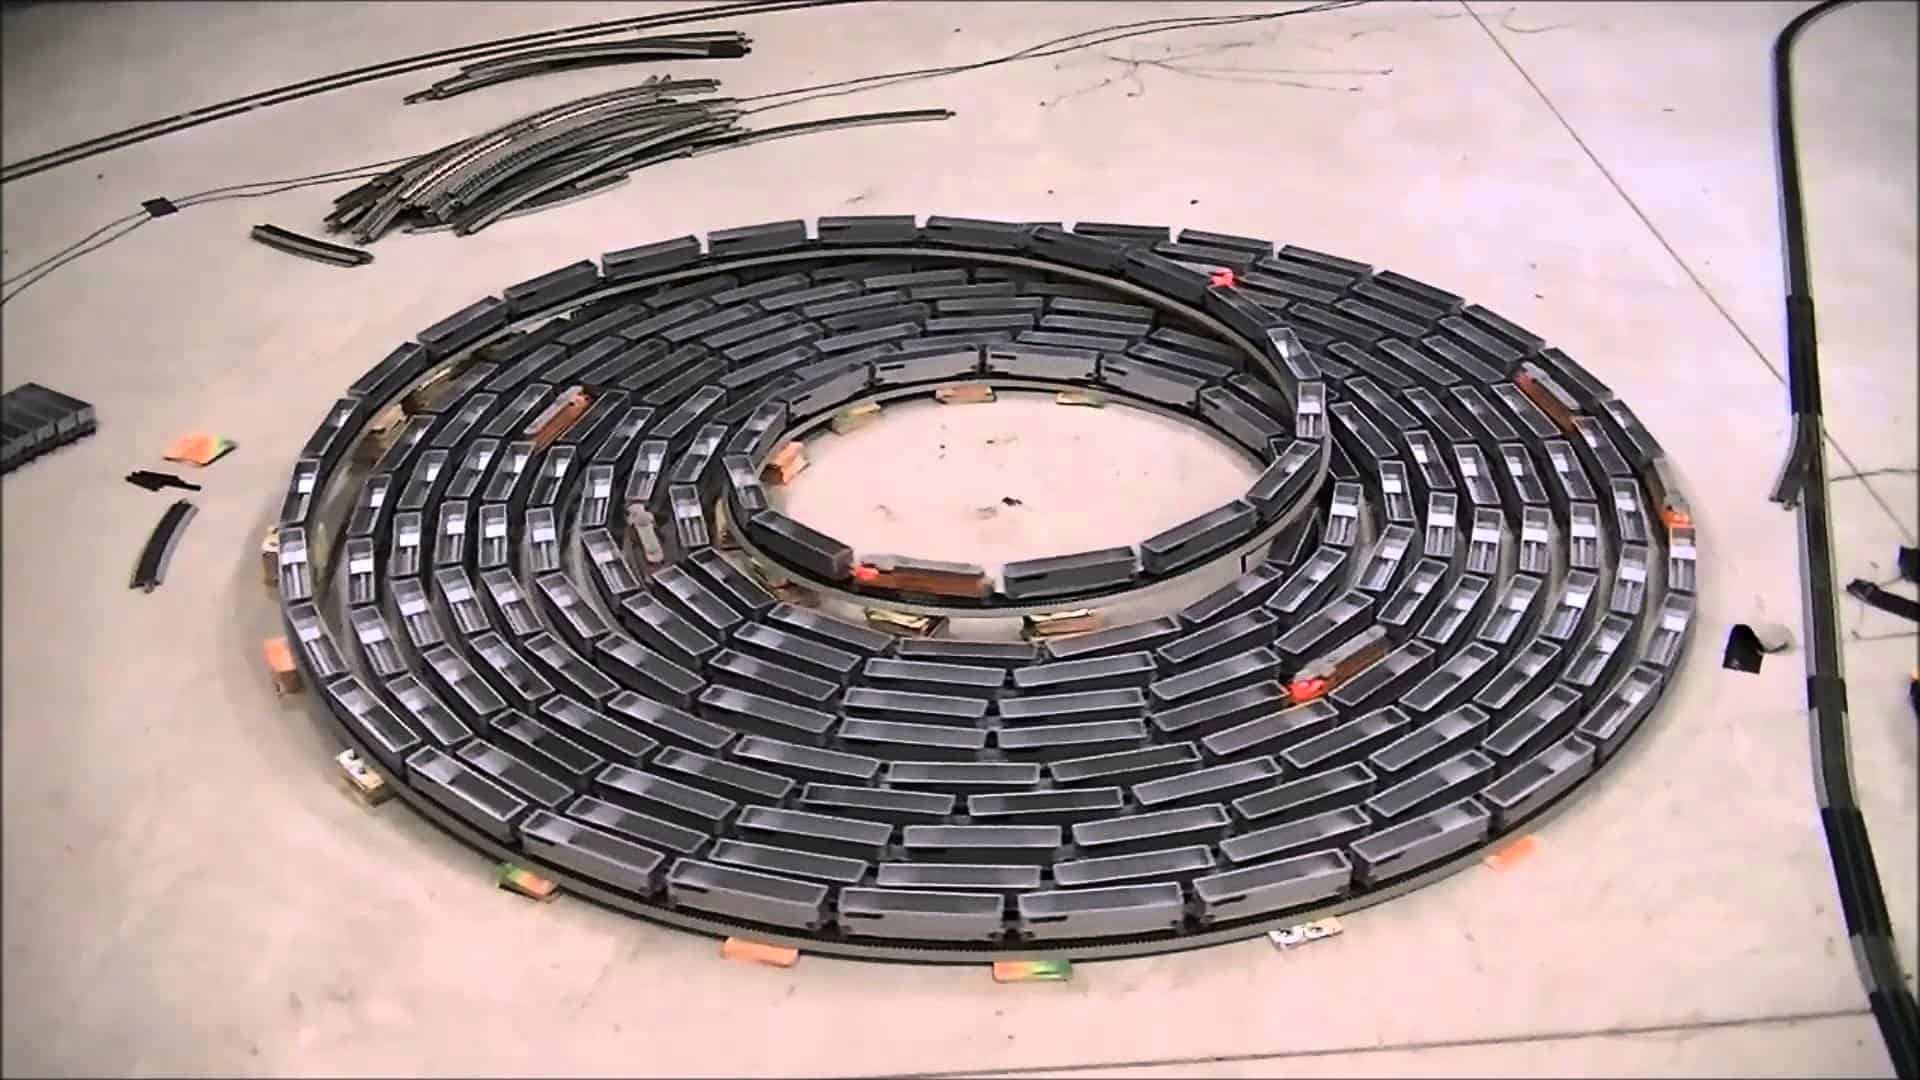 Endless spiral with one gauge HO model railway